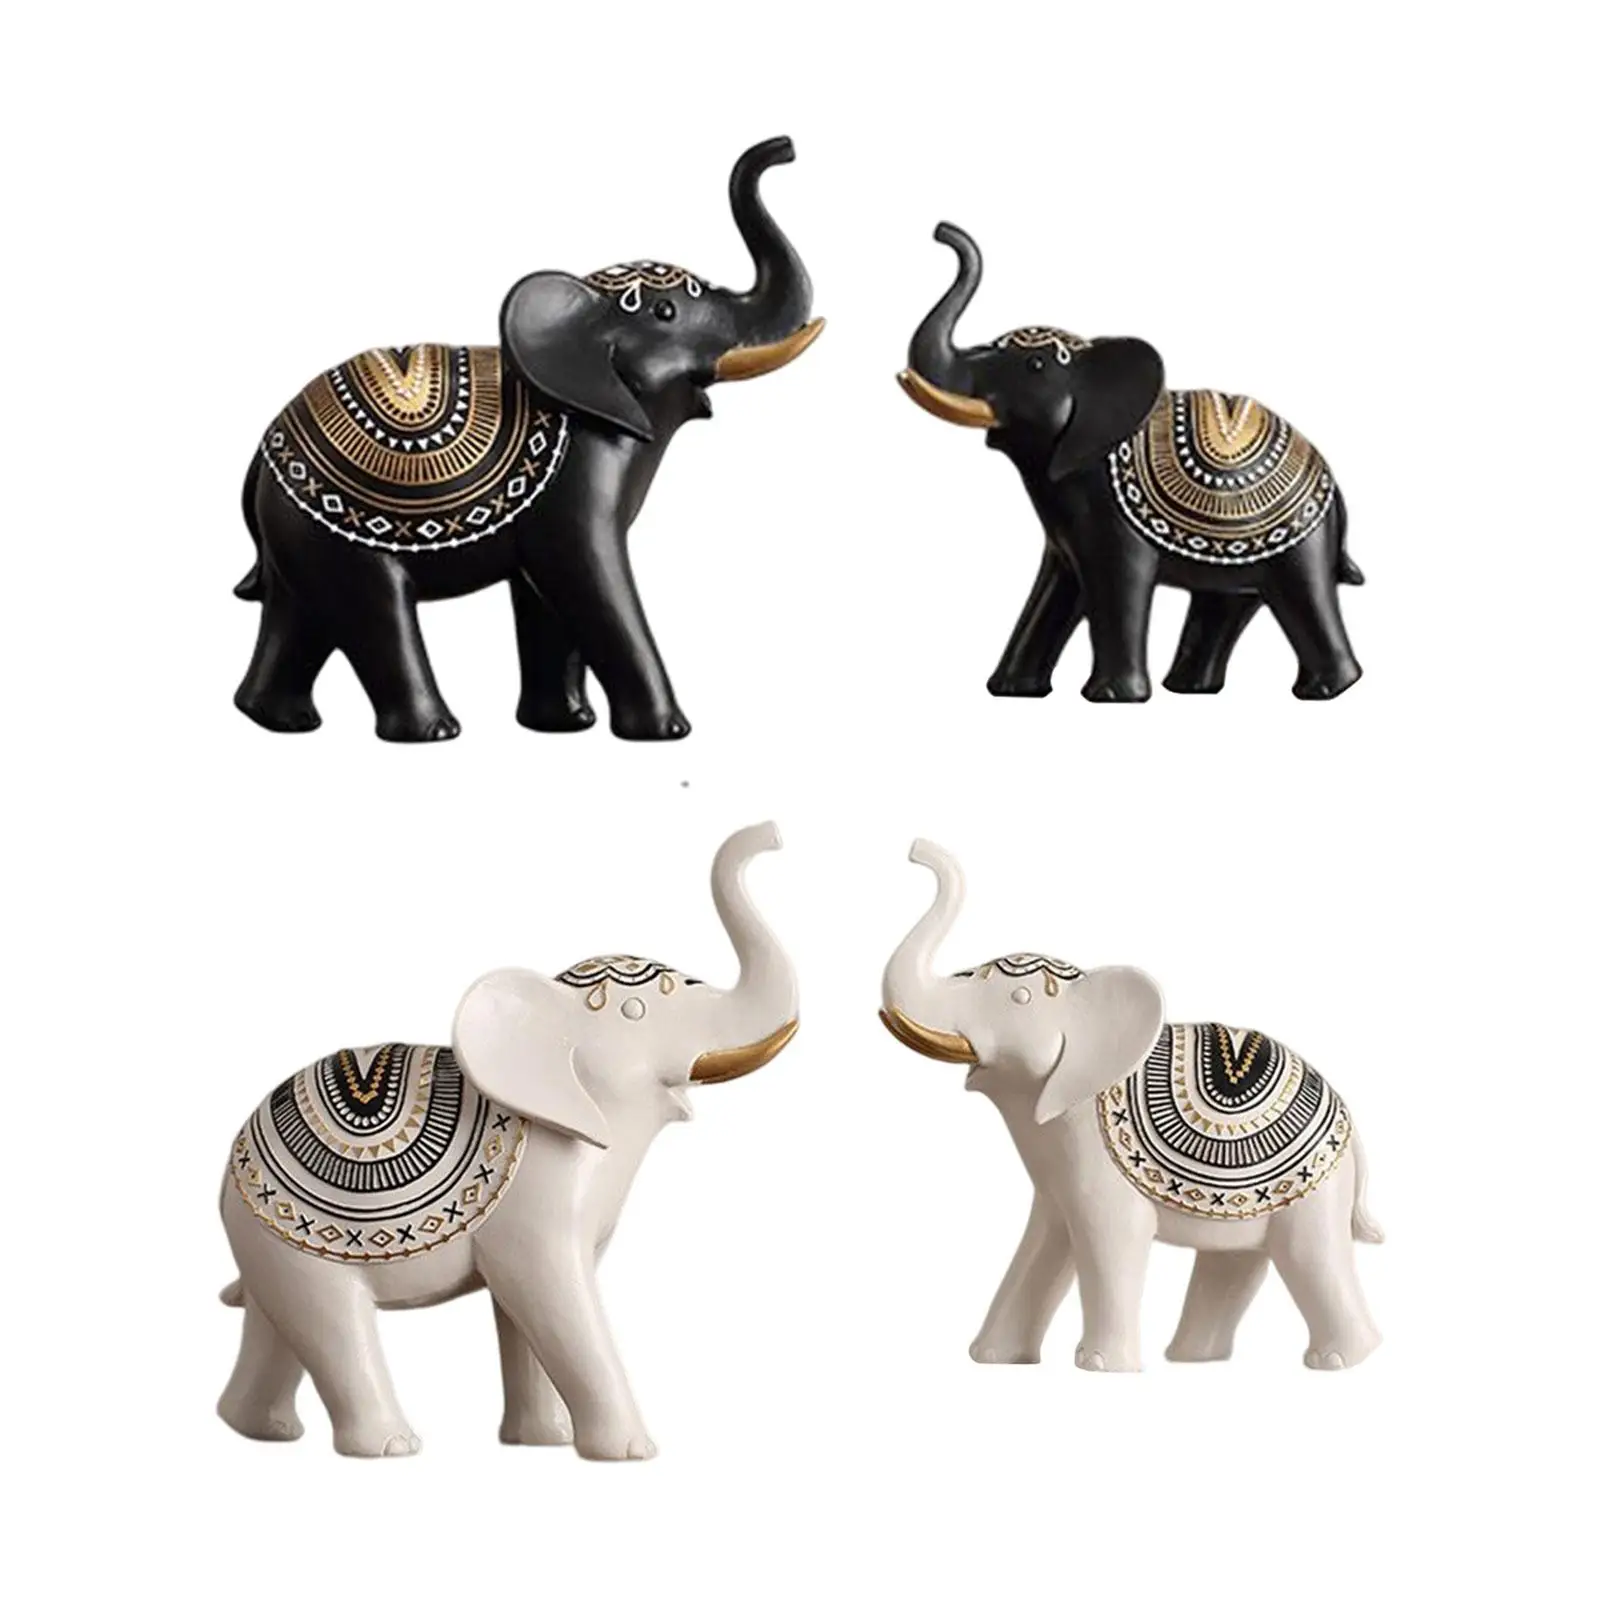 

Decorative Sculpture Animal Figurine Housewarming Gifts Crafts Couple Elephants Statue for Bookcase Bedroom Cabinet Living Room